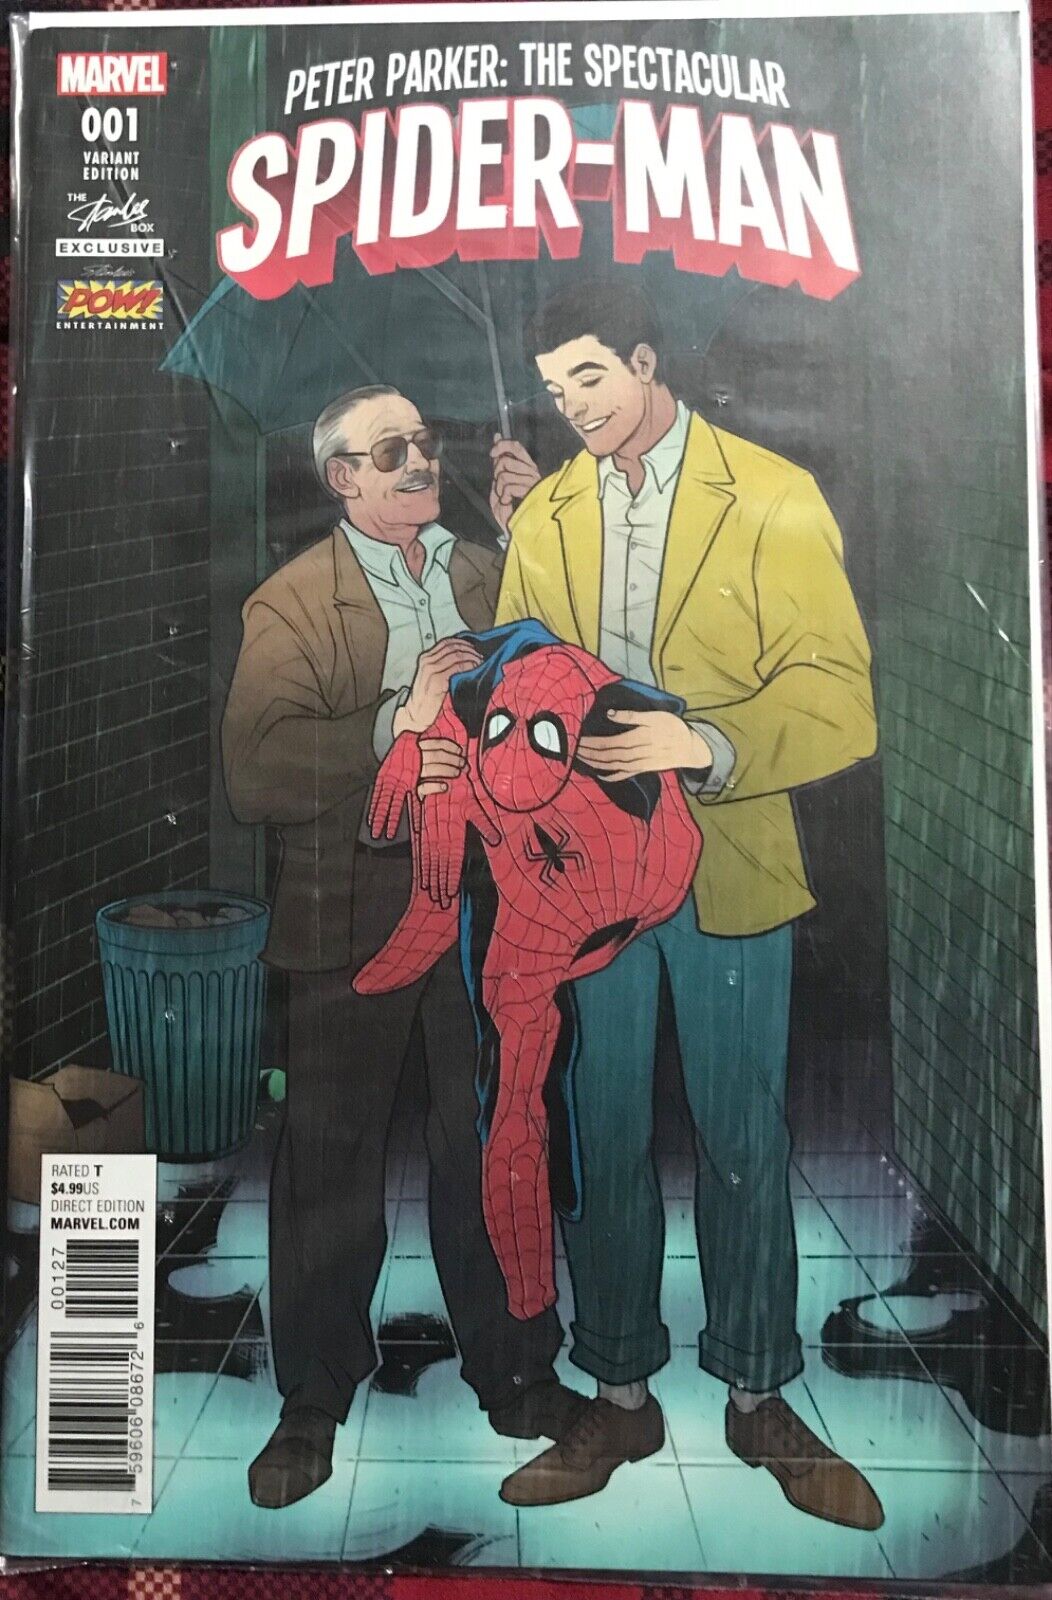 PETER PARKER SPECTACULAR SPIDER-MAN #1 Stan Lee Comic Box Exclusive 2017 VARIANT